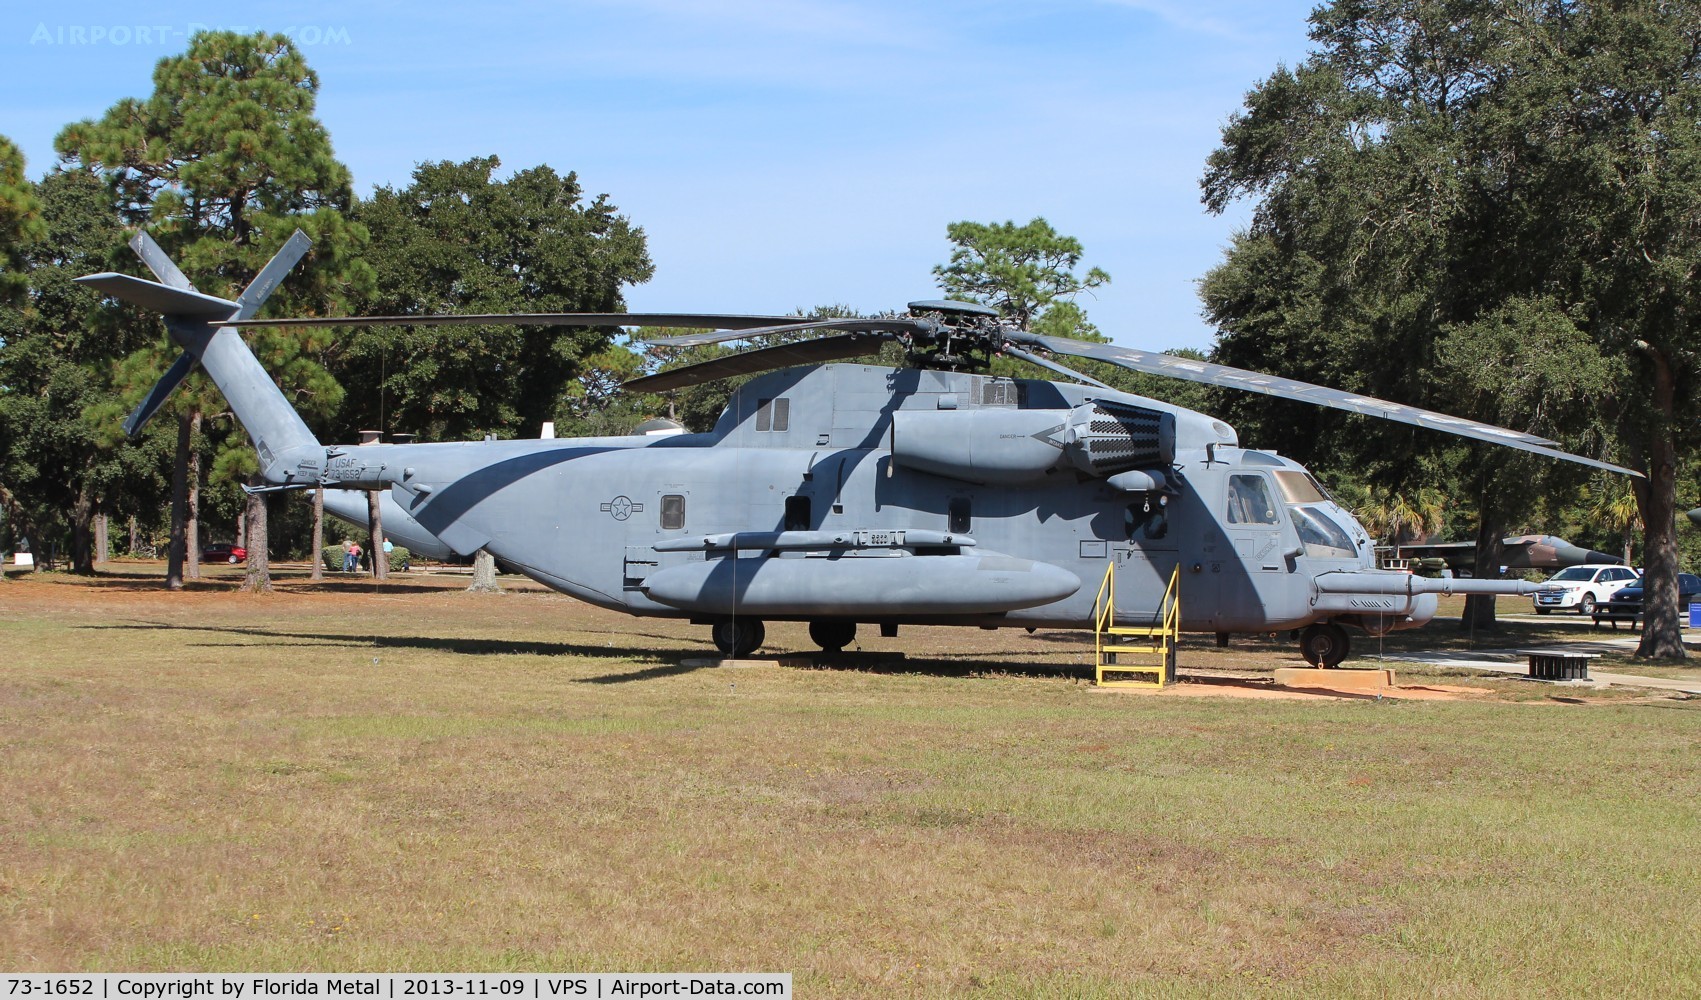 73-1652, 1973 Sikorsky MH-53M Pave Low IV C/N 65-390, MH-53M Pave Low